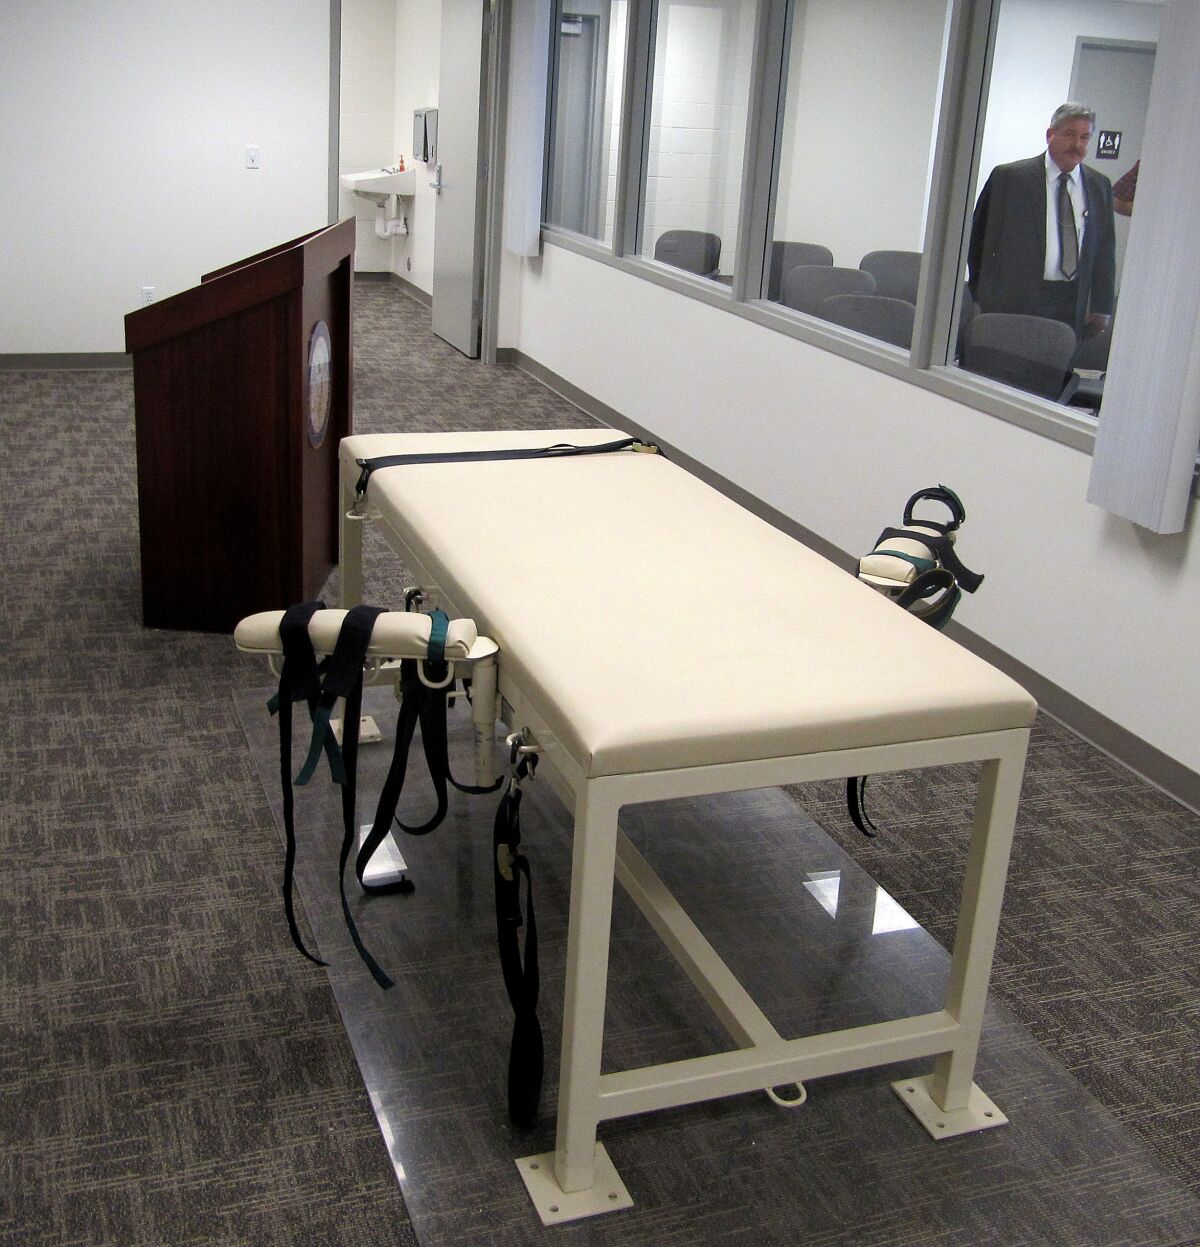 A bed with restraints in an execution chanber